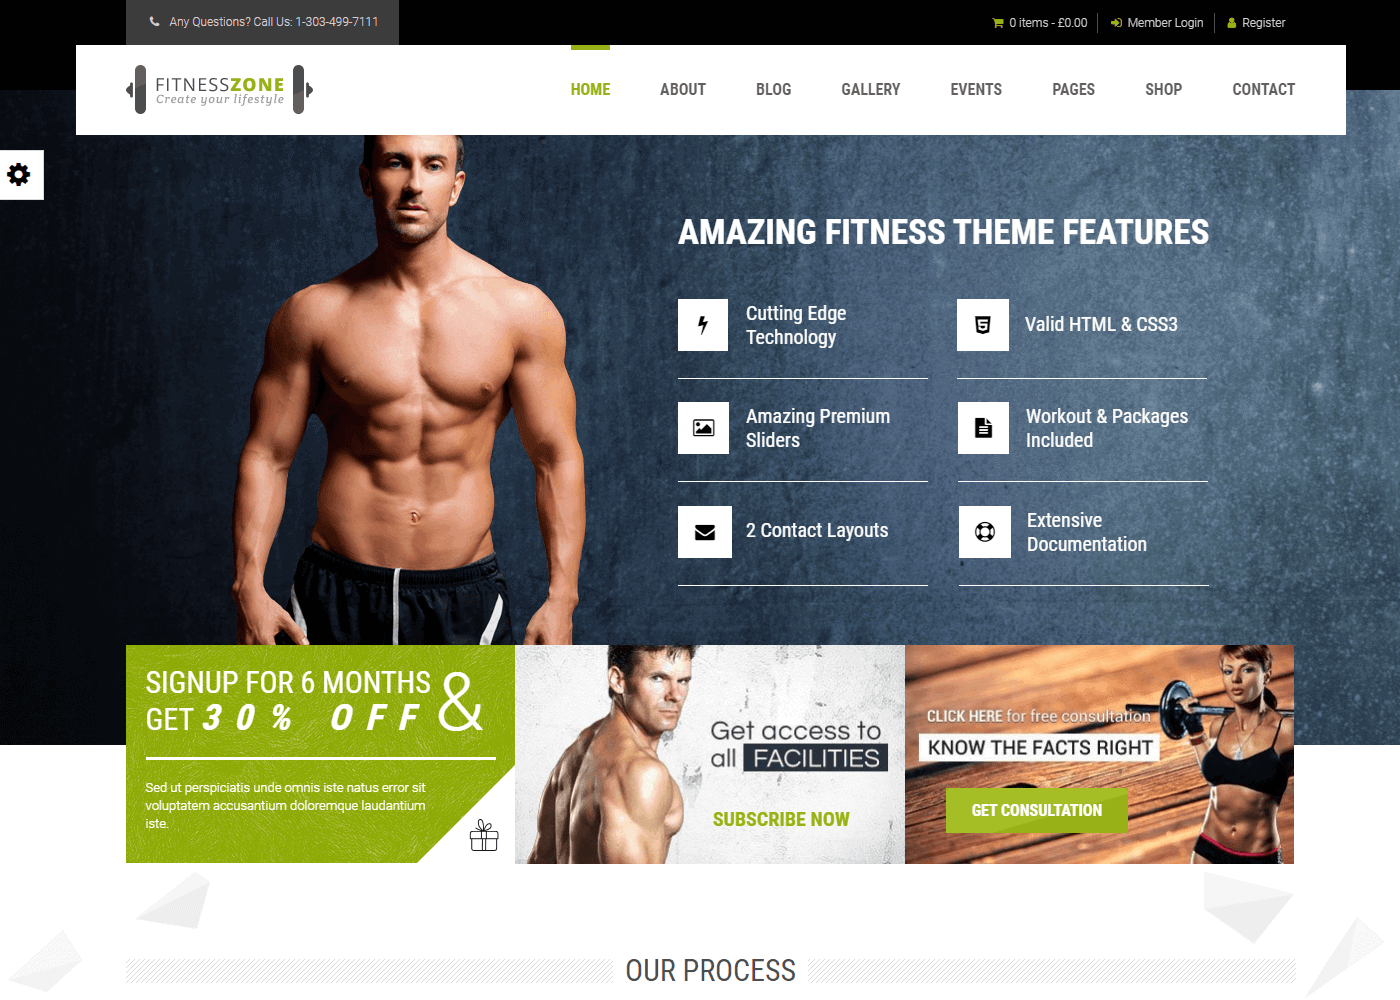 Fitness Zone: Best WordPress Themes for Gym and Fitness